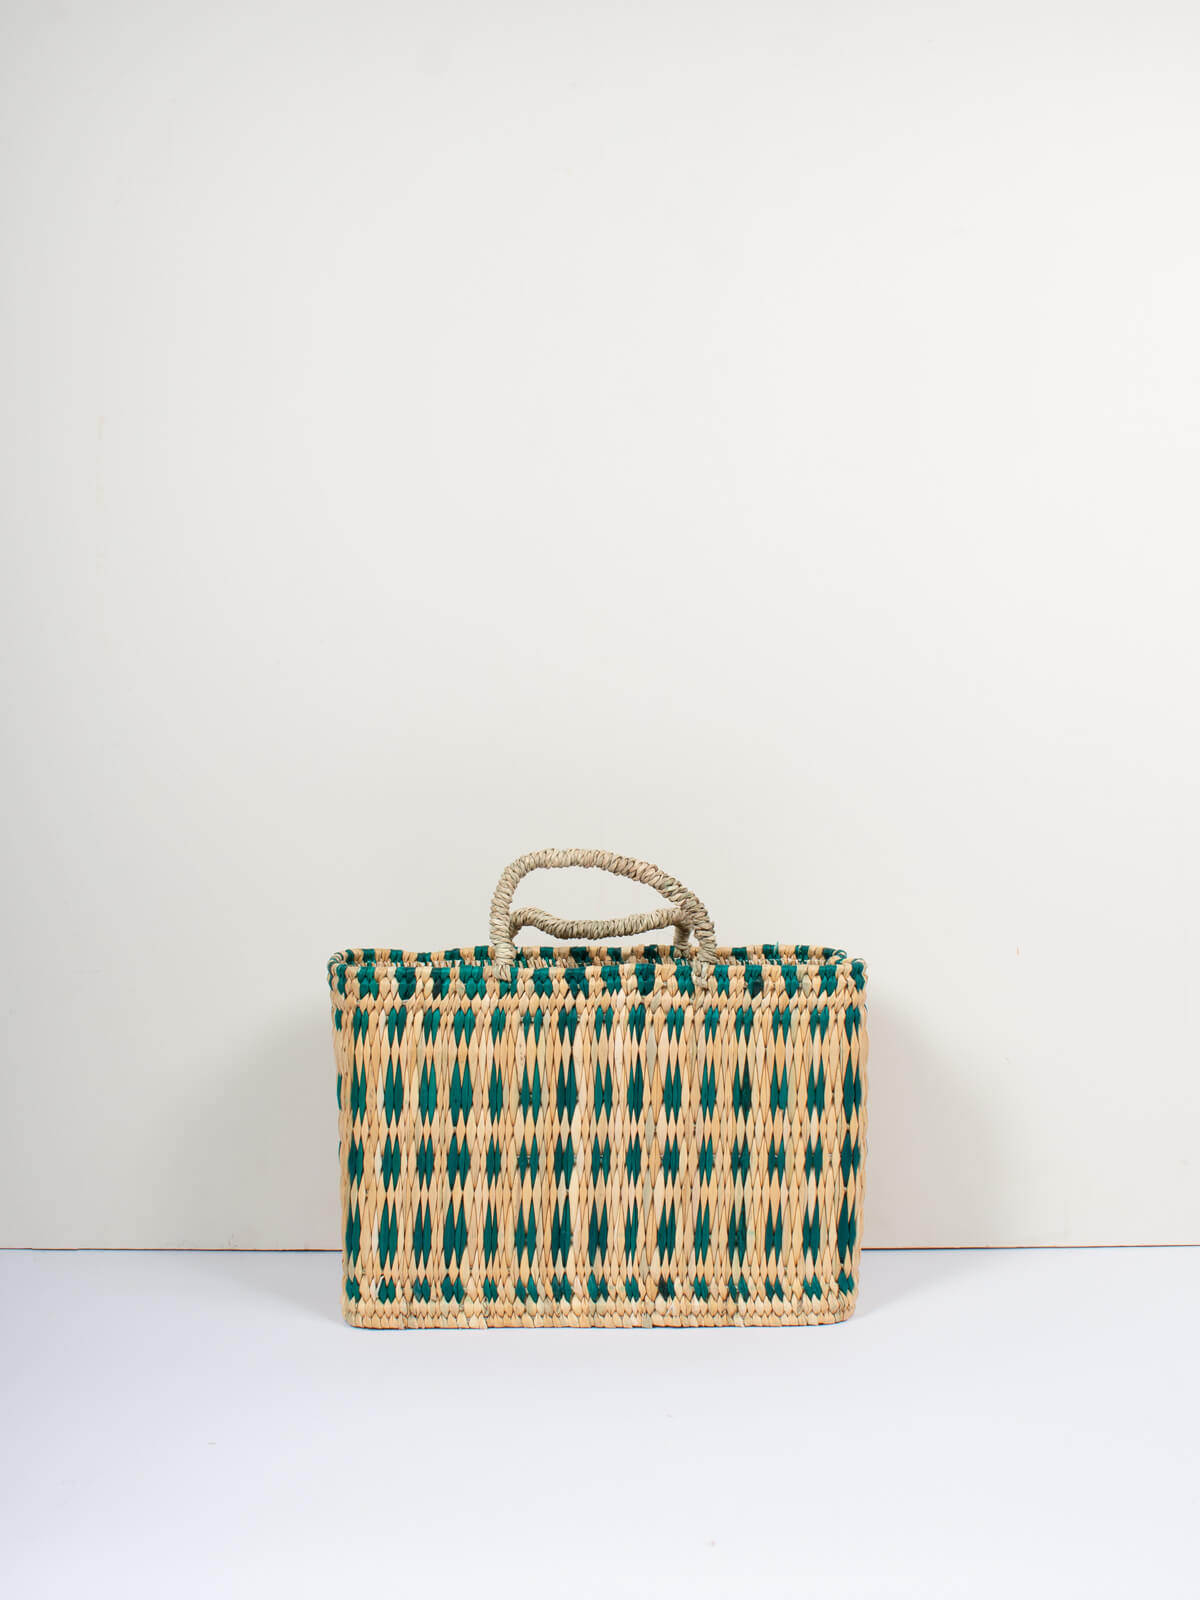 Woven Reed Basket, Green